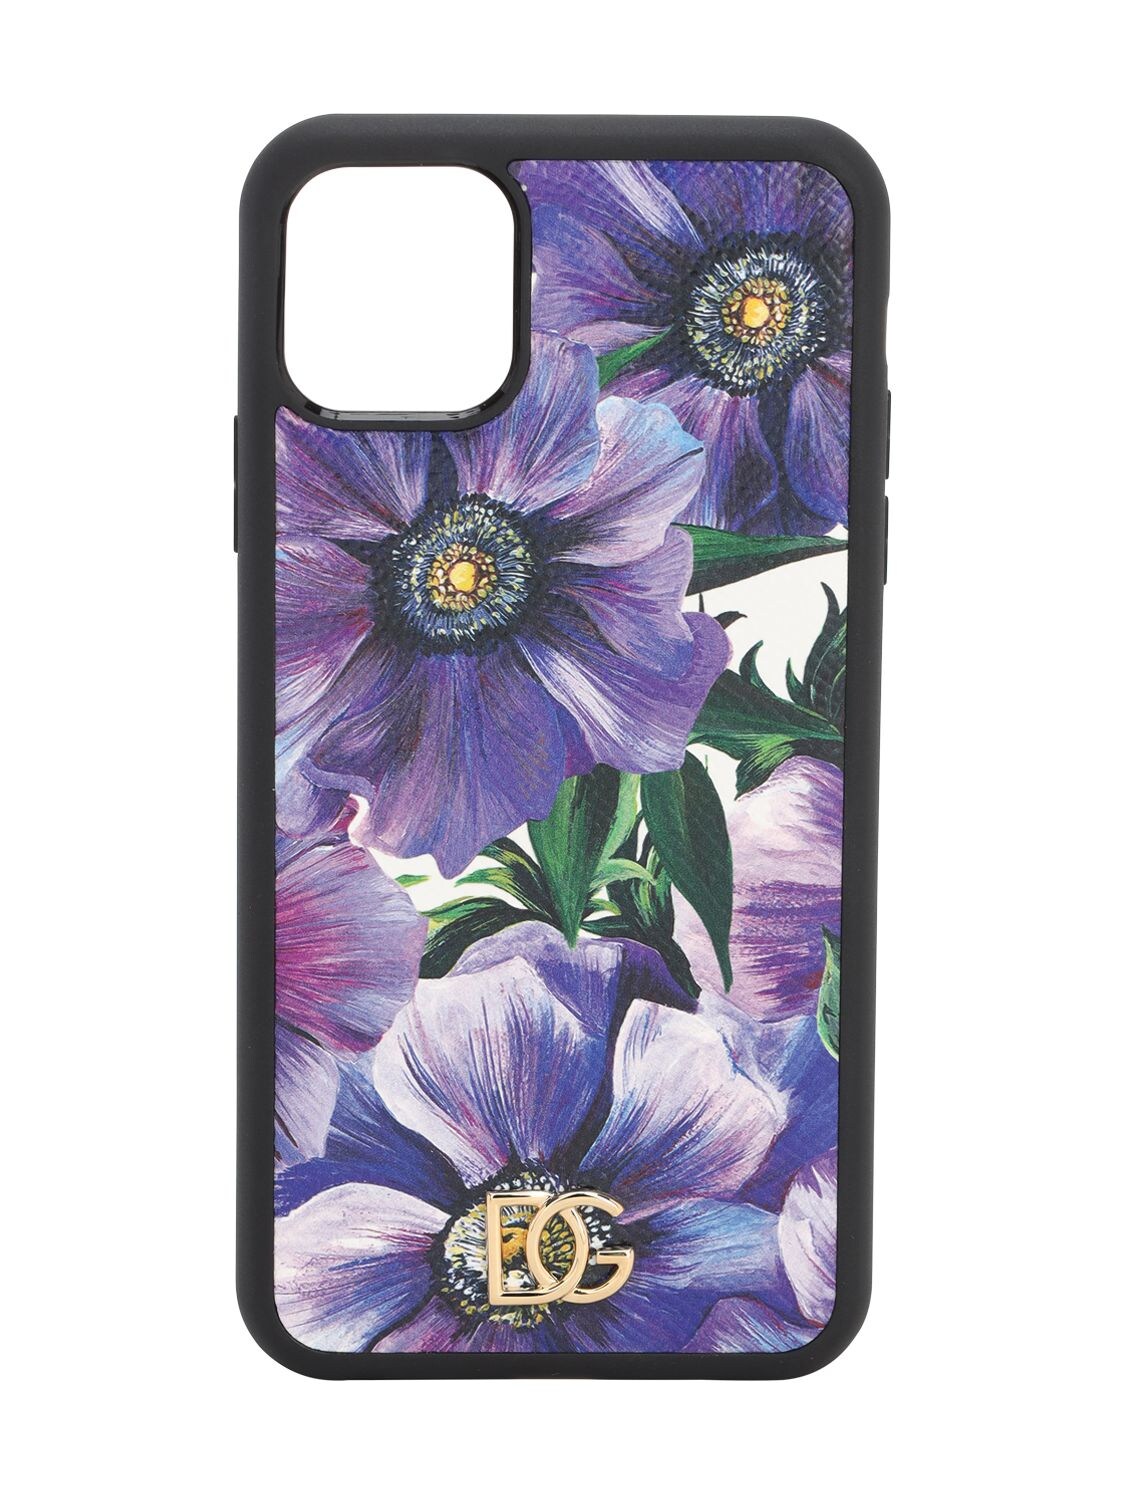 Dolce & Gabbana Printed Leather Iphone 11 Pro Max Cover In Anemone